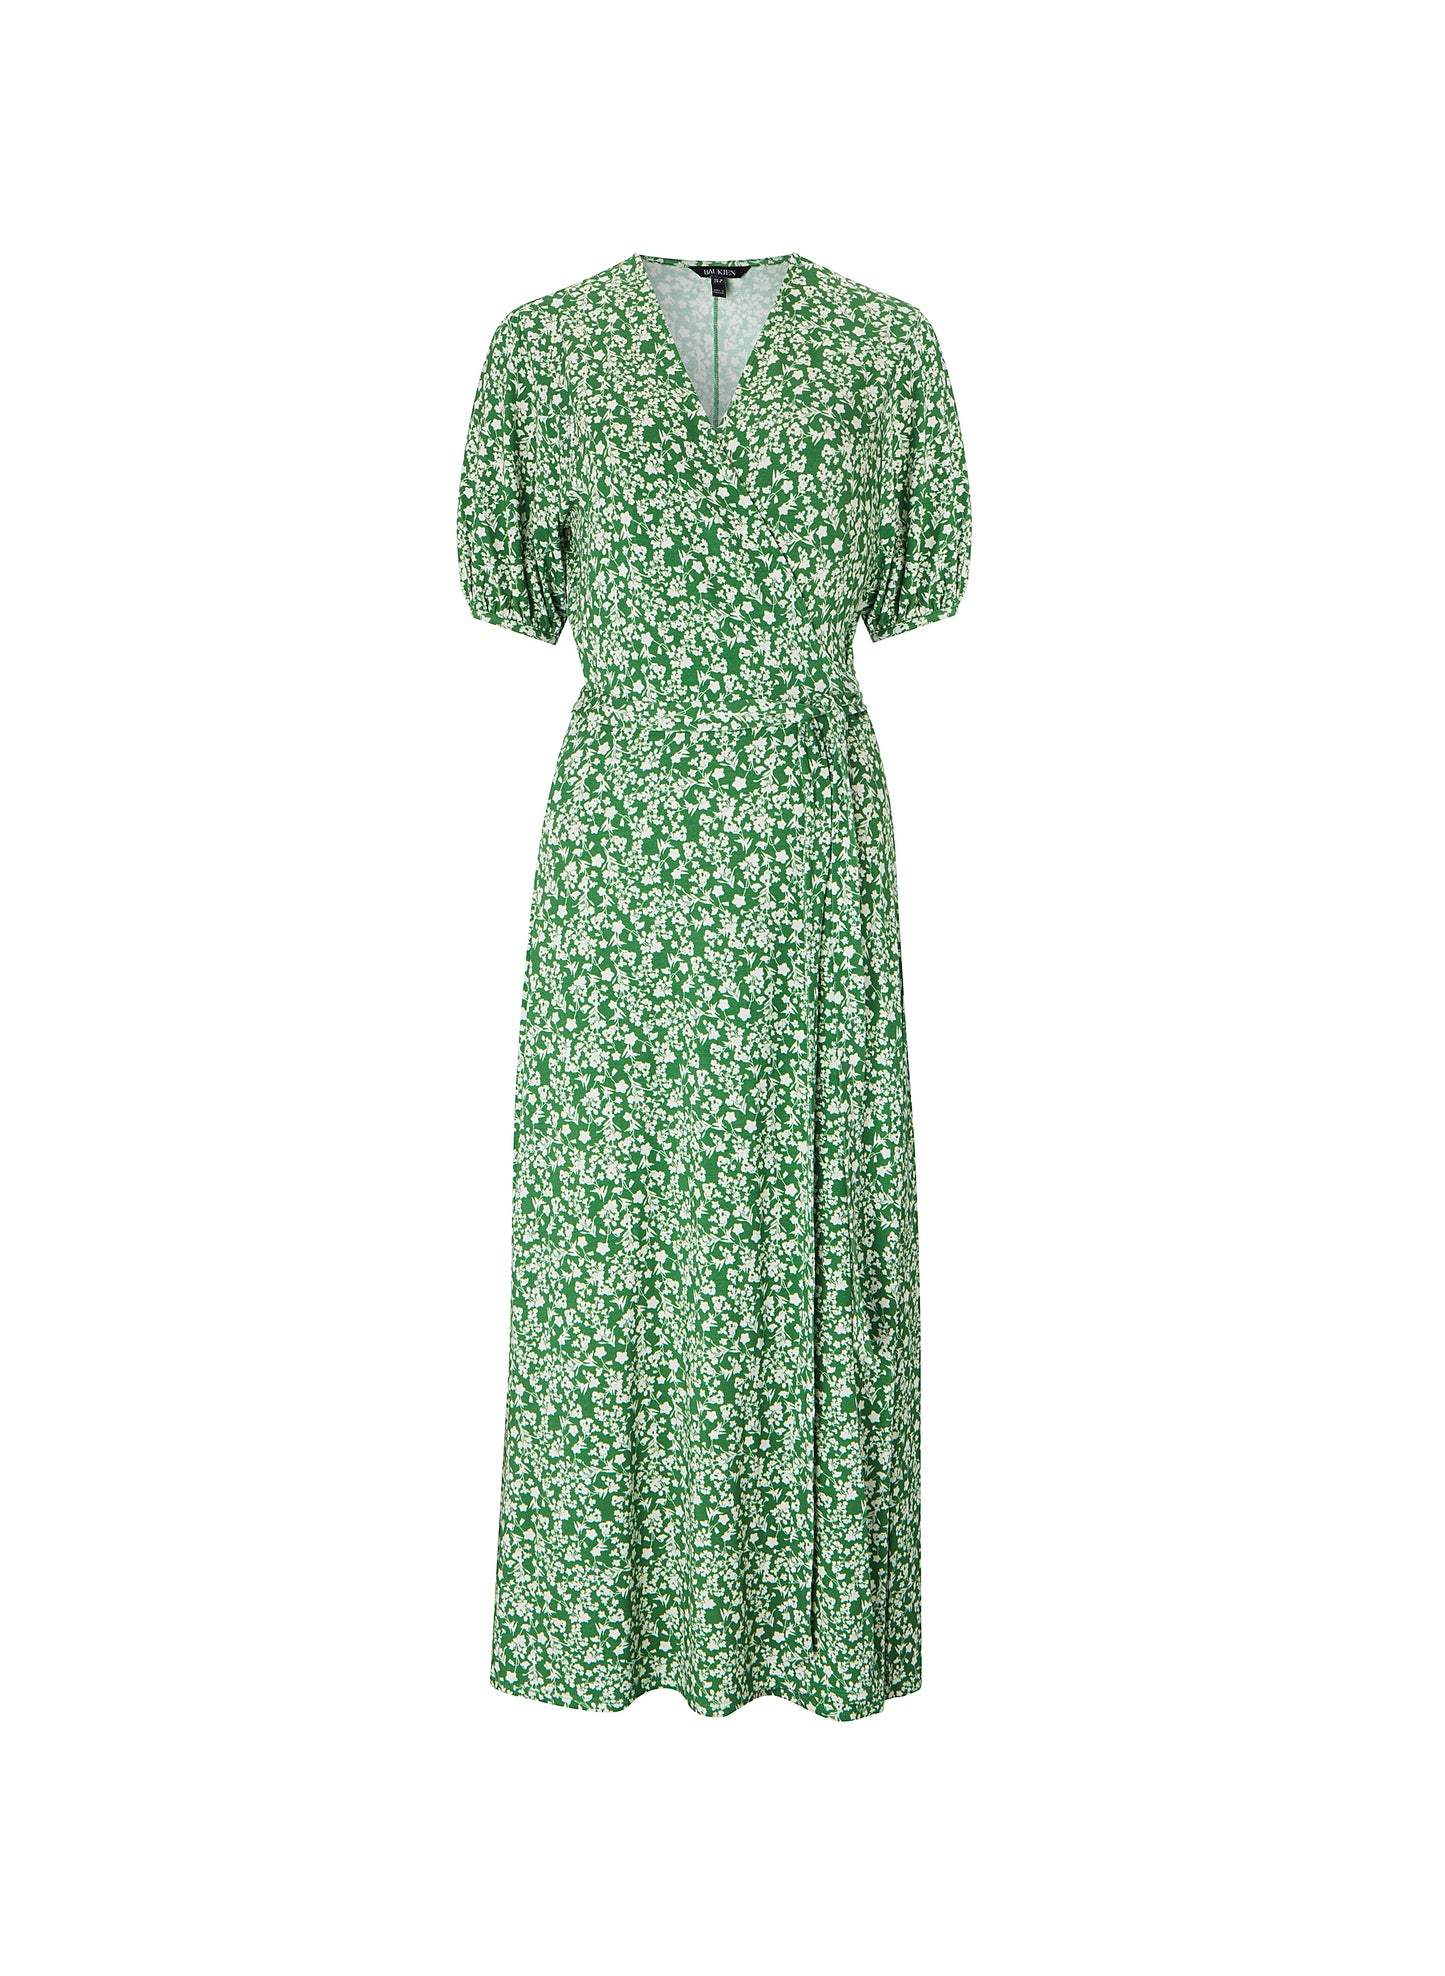 Pre-Loved Colette Dress with LENZING™ ECOVERO™